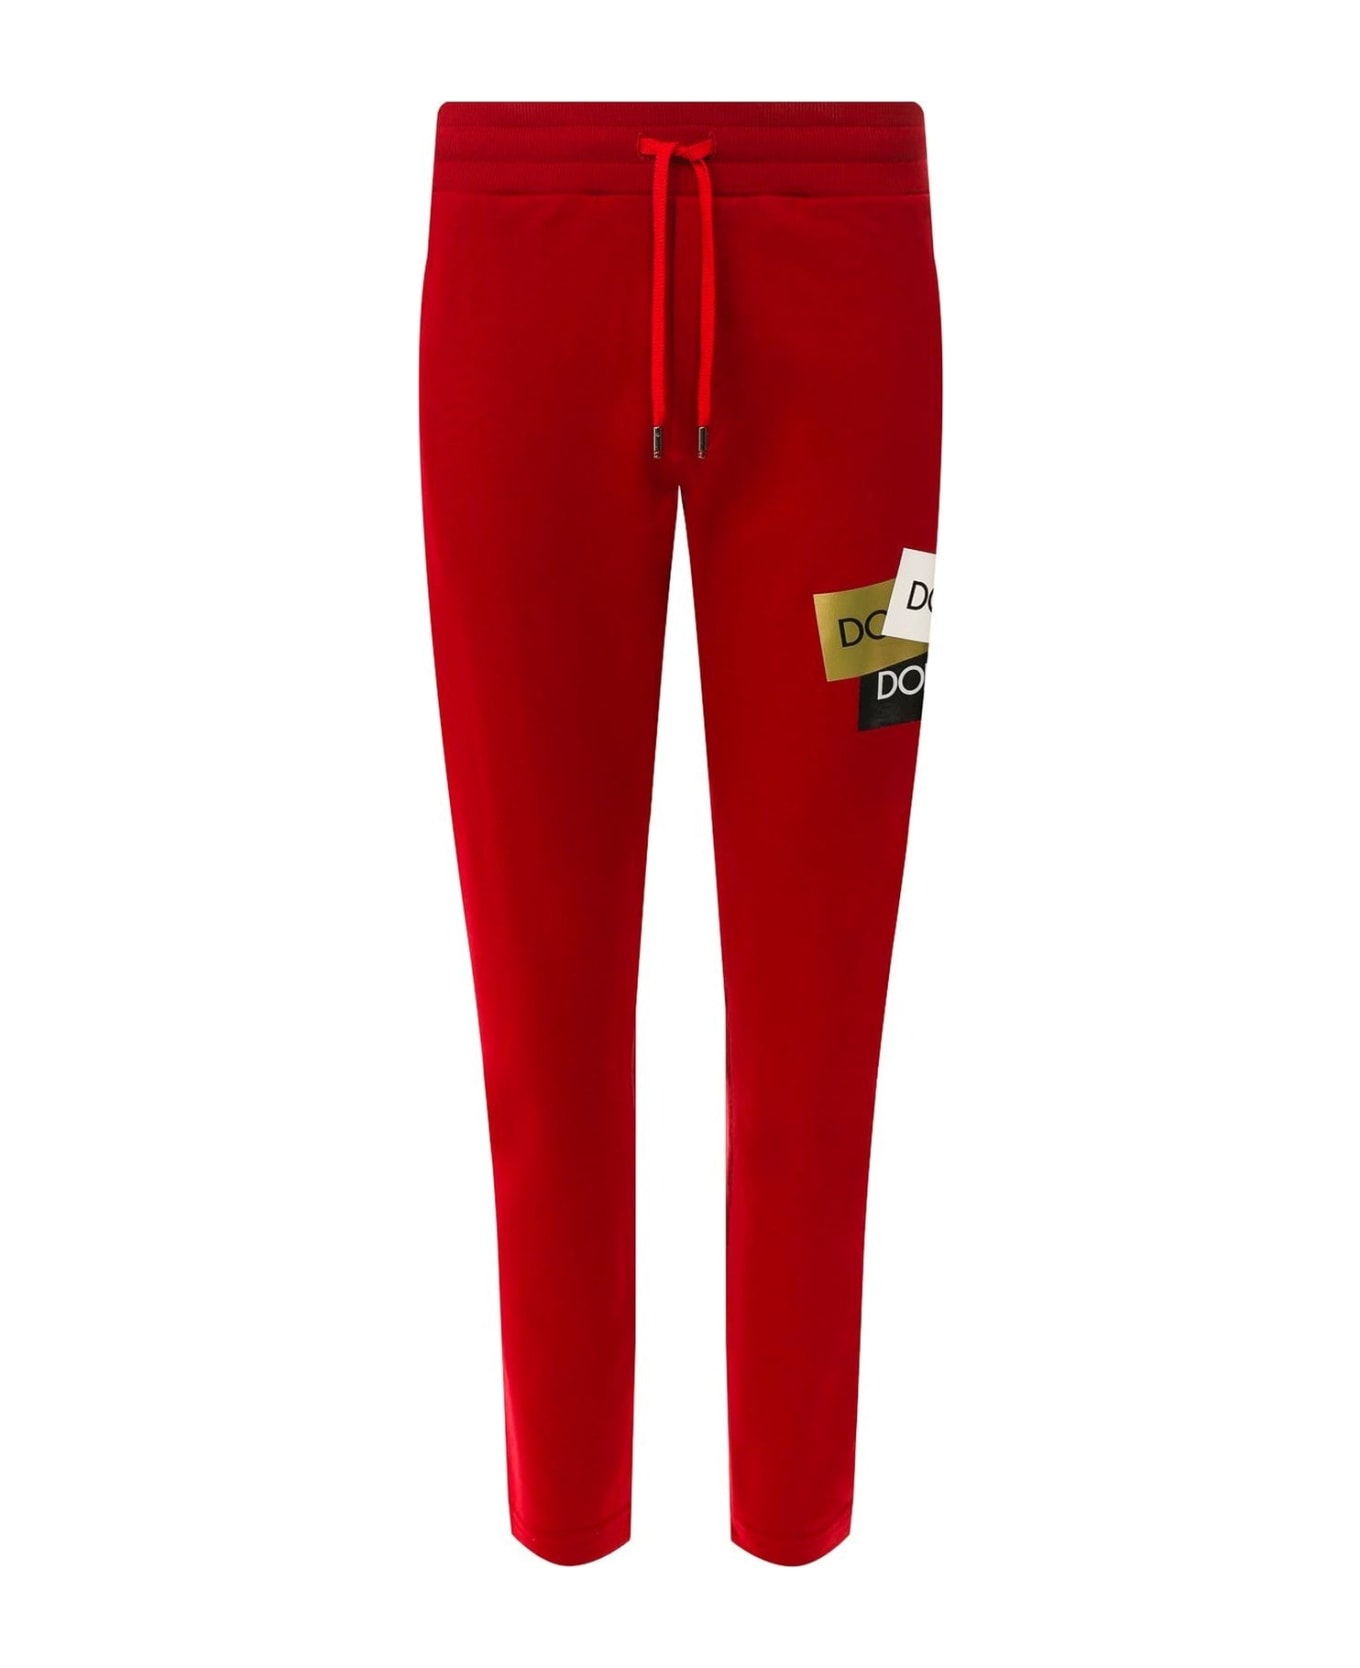 Dolce & Gabbana Jogging Style Pants - Red ボトムス